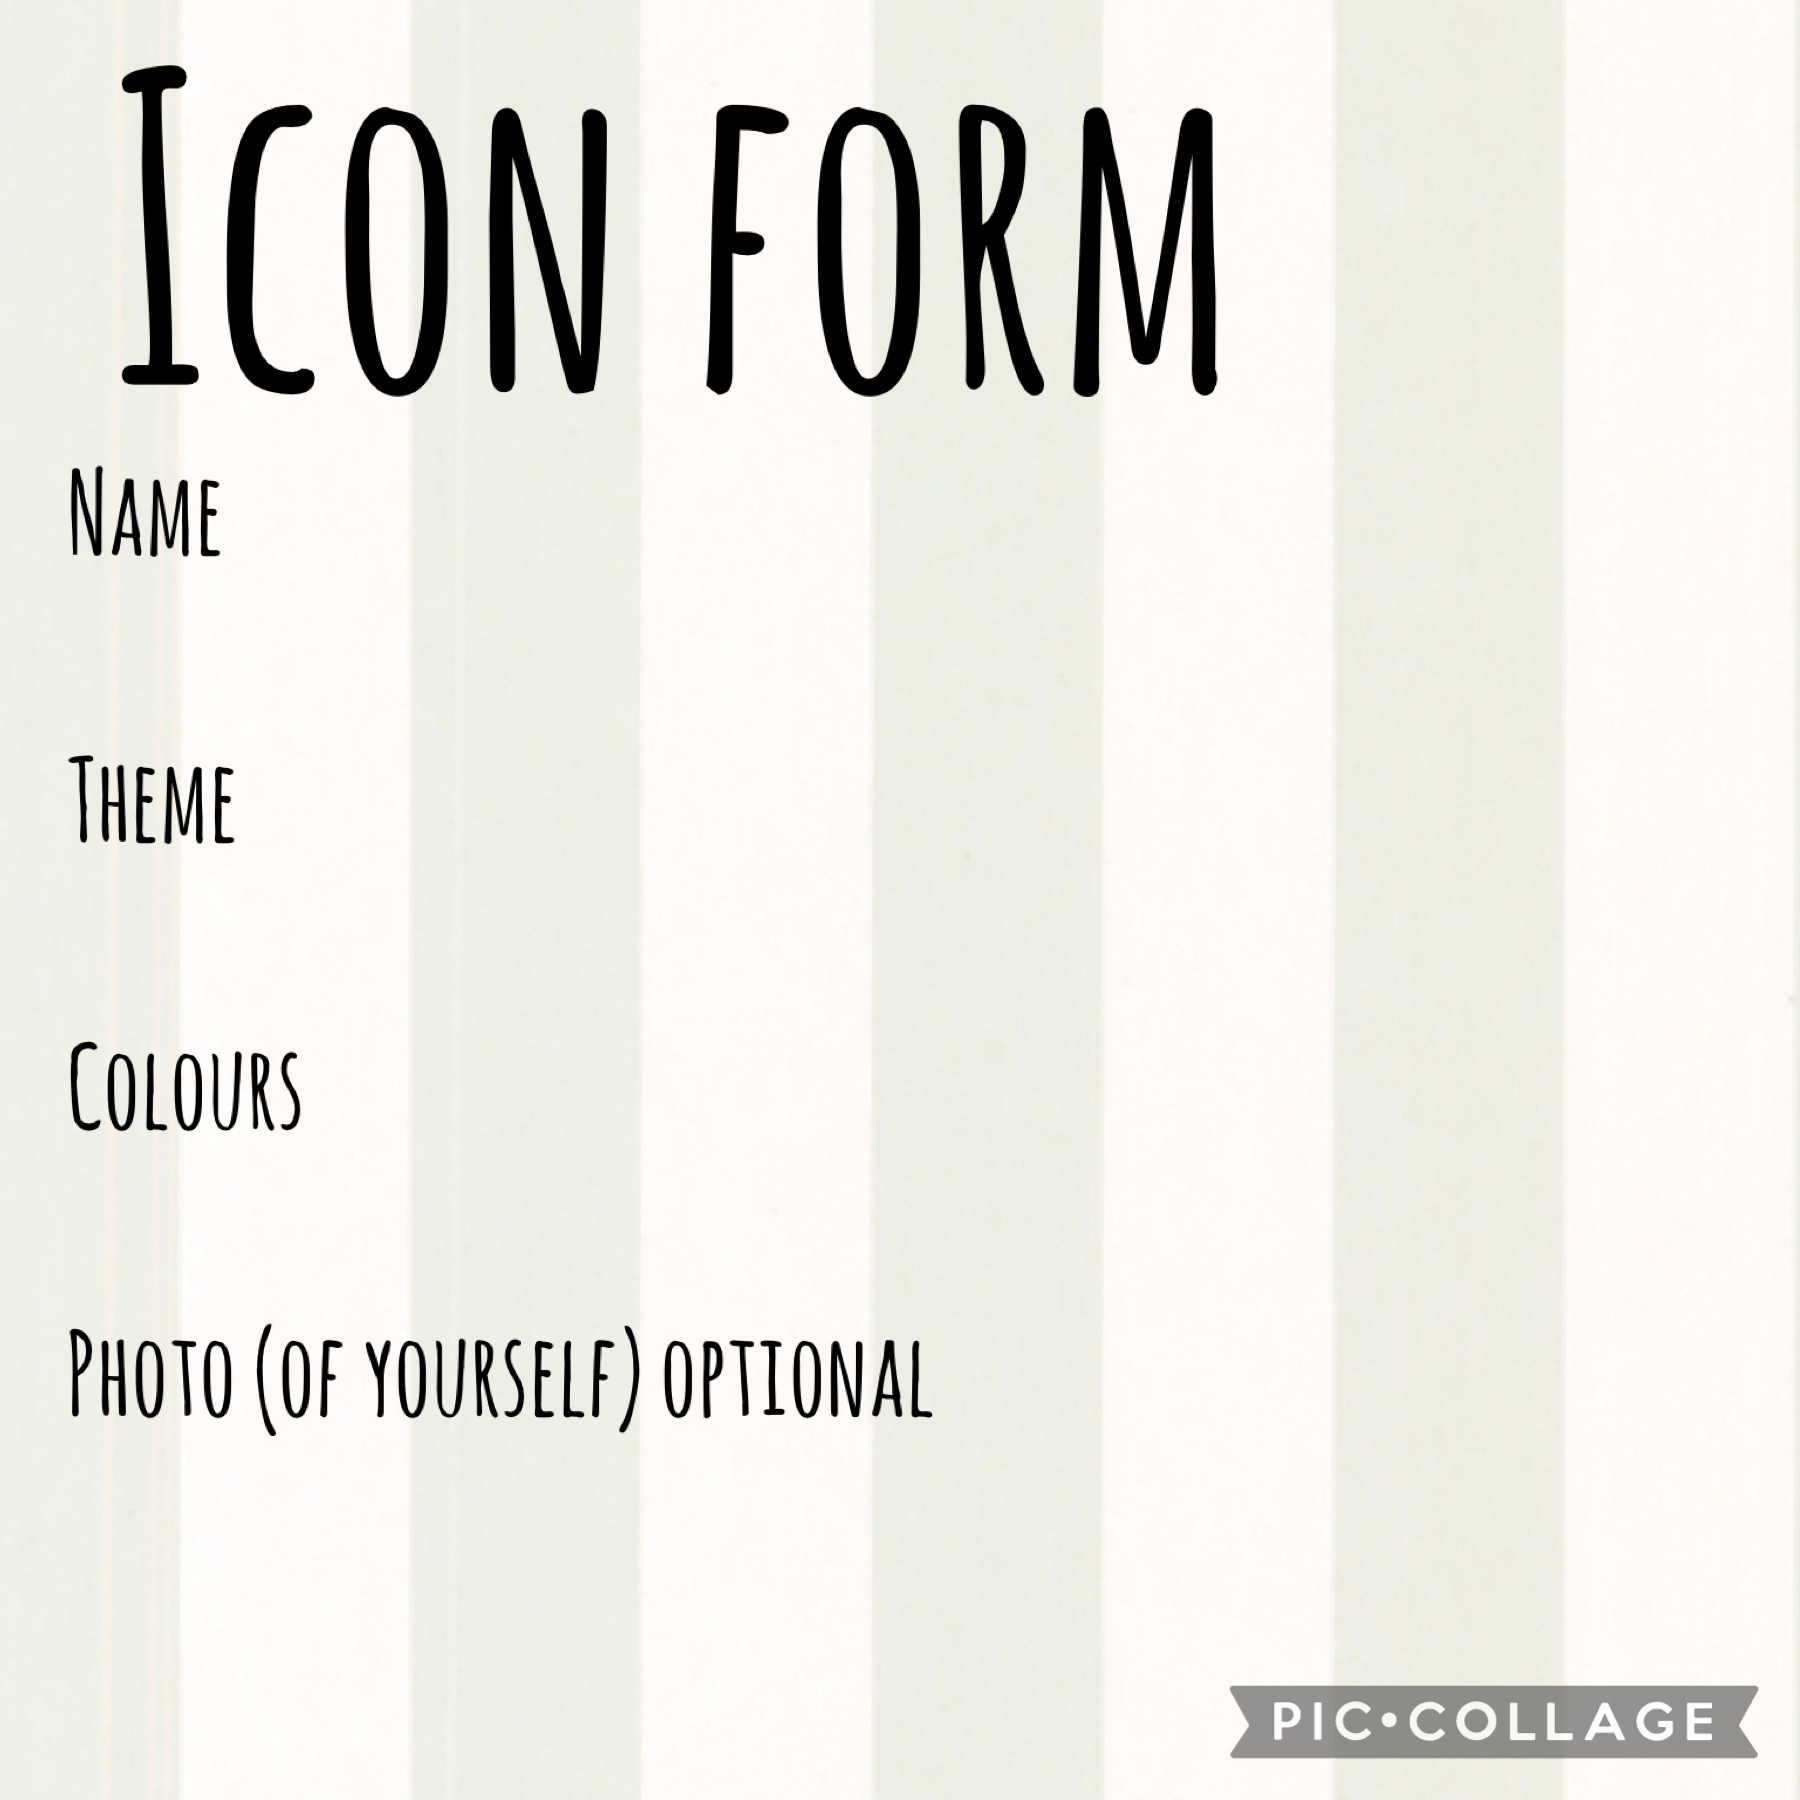 Remix and fill out this form and I will remix and icon for u on ur latest post